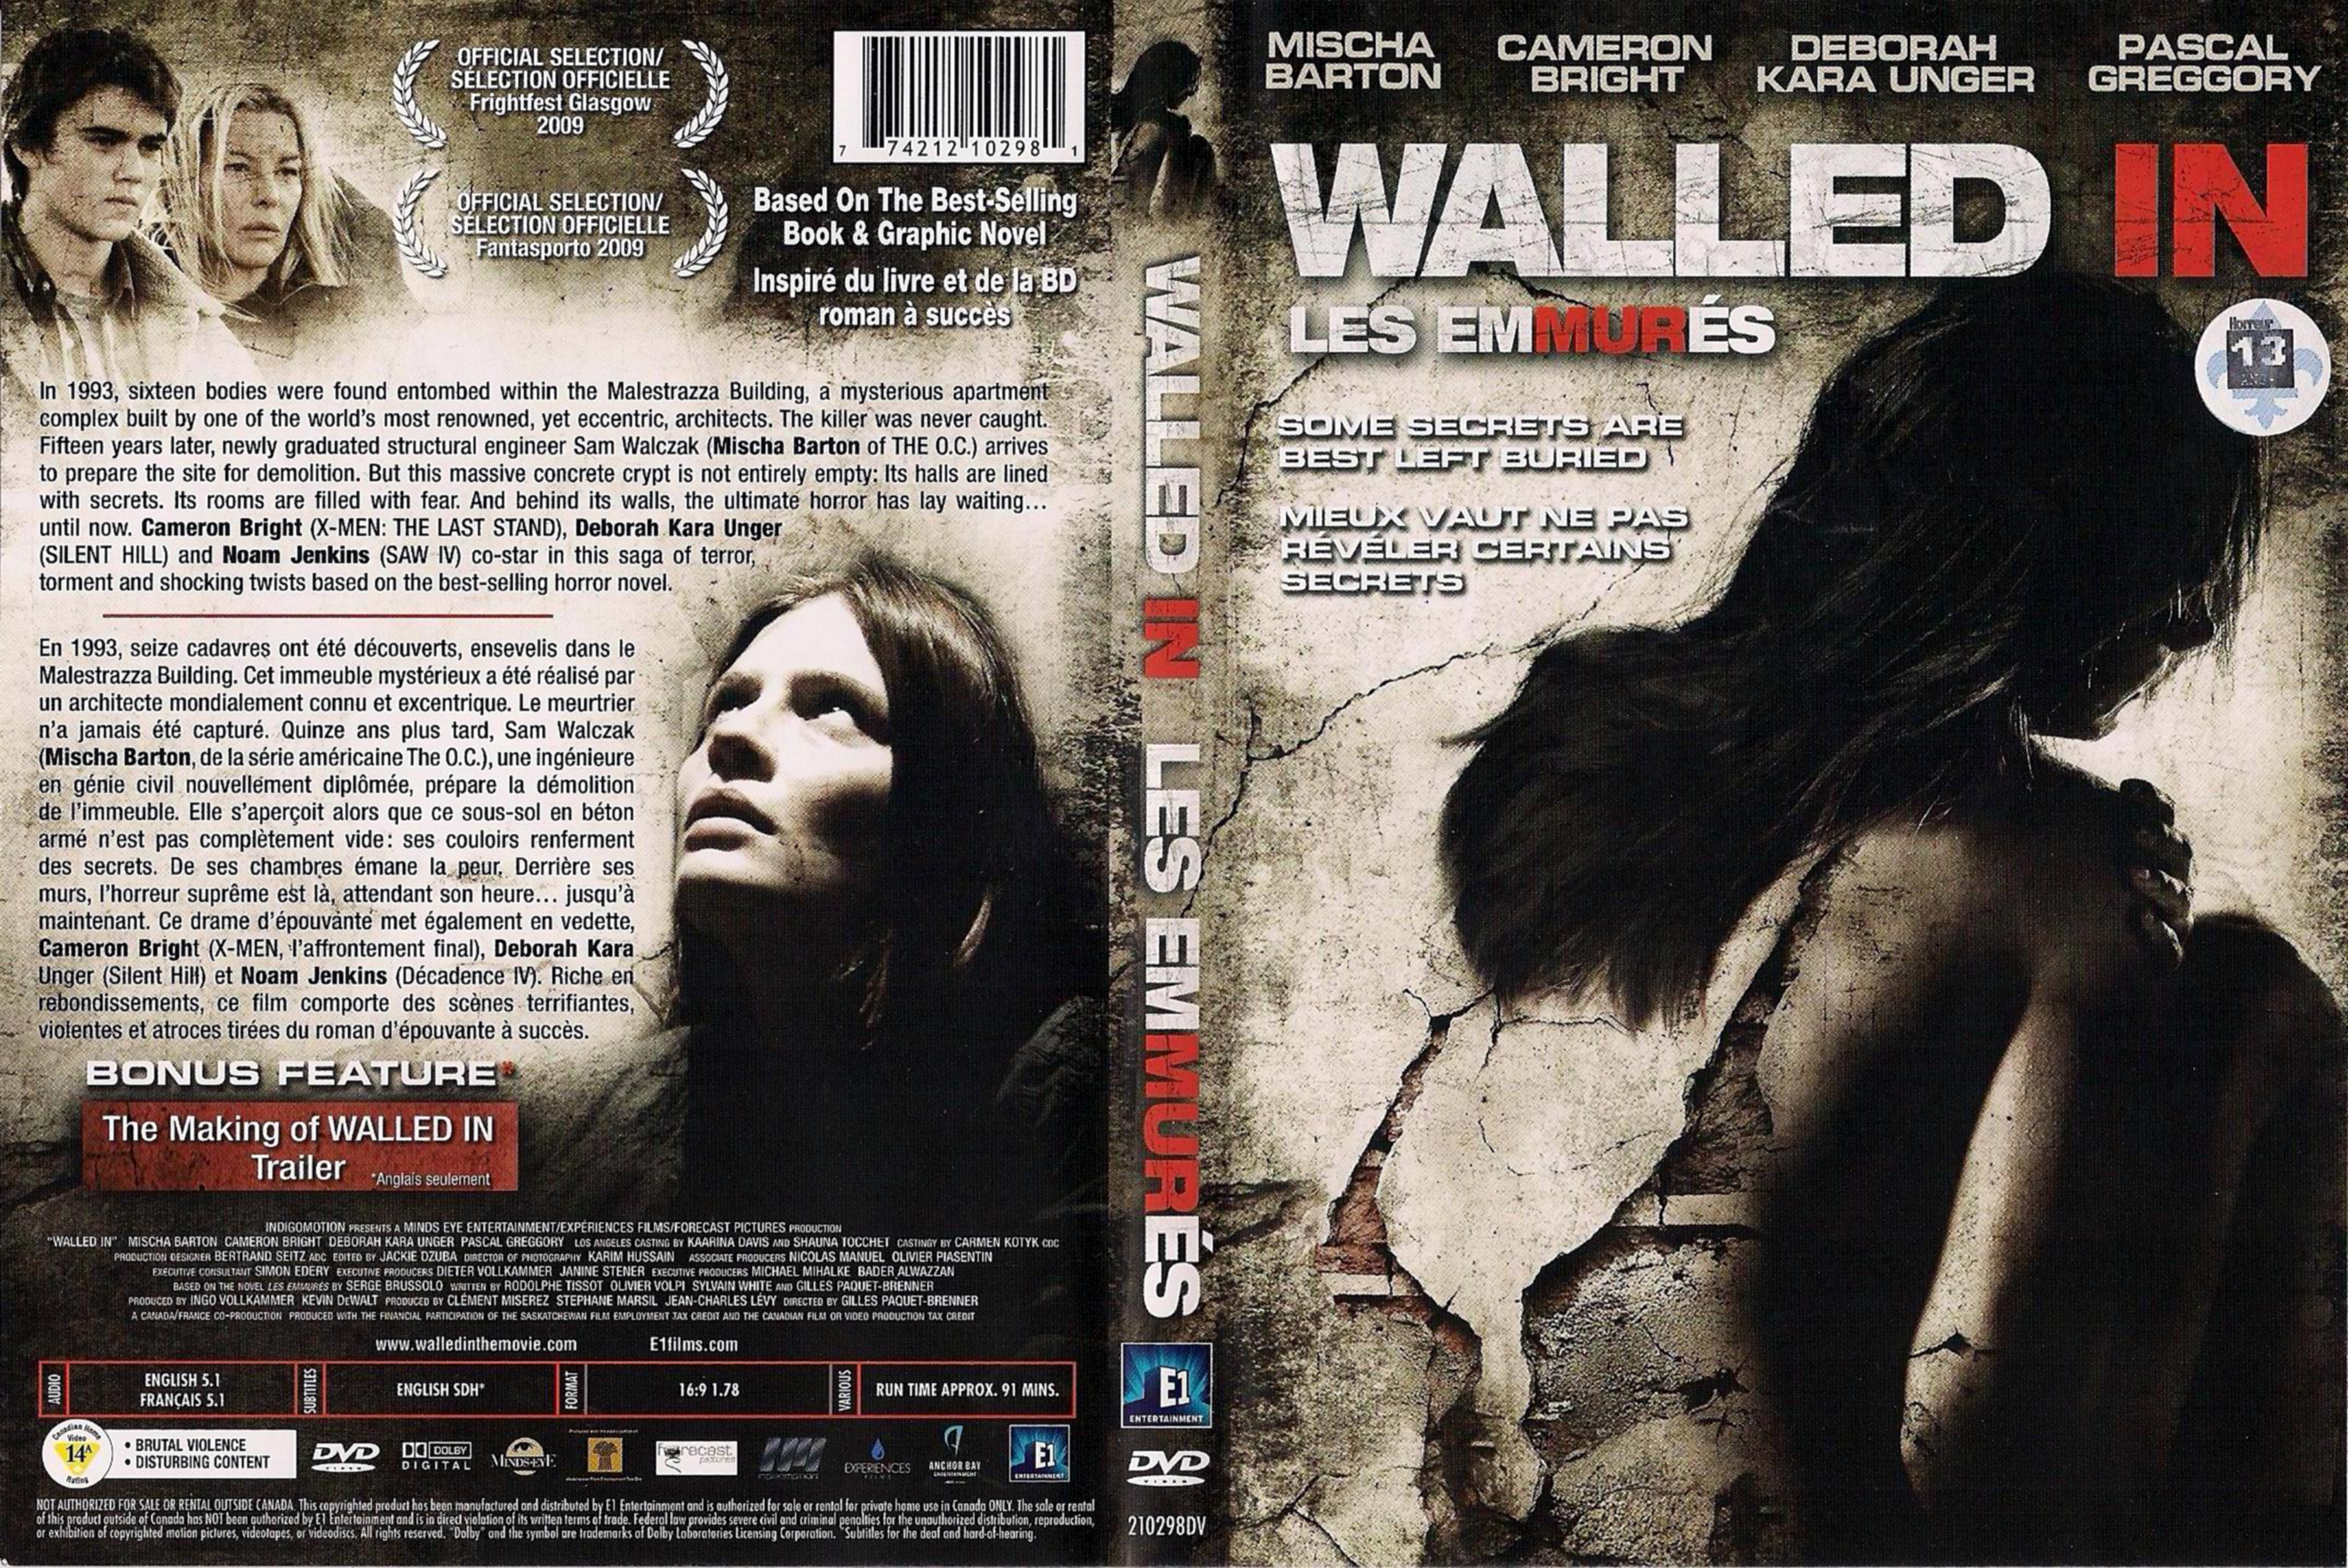 Jaquette DVD Les emmurs - Walled in (Canadienne)